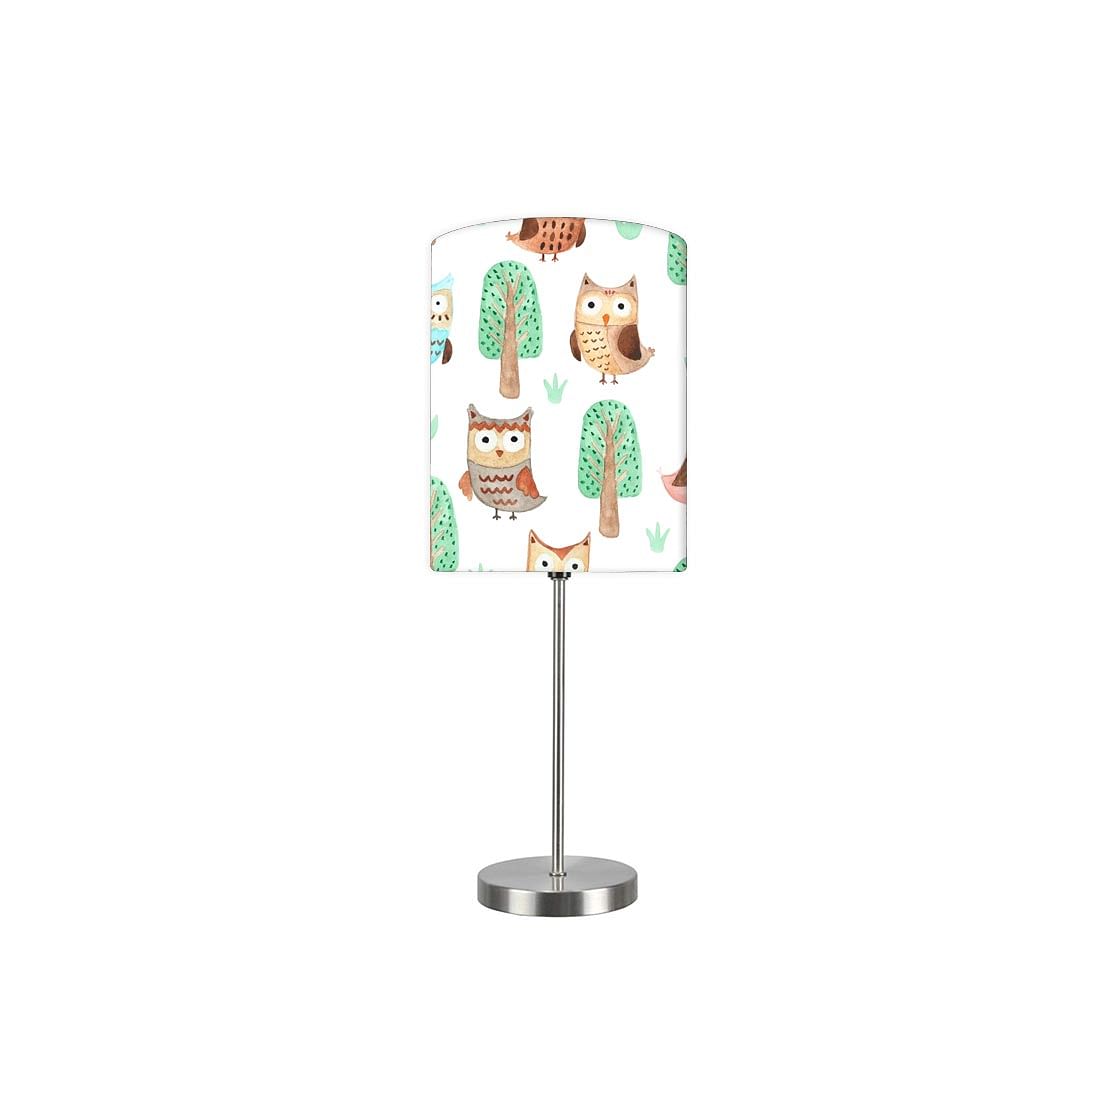 Small Night Lamps for Bedside Lamp - Owl Tree World 0028 Nutcase